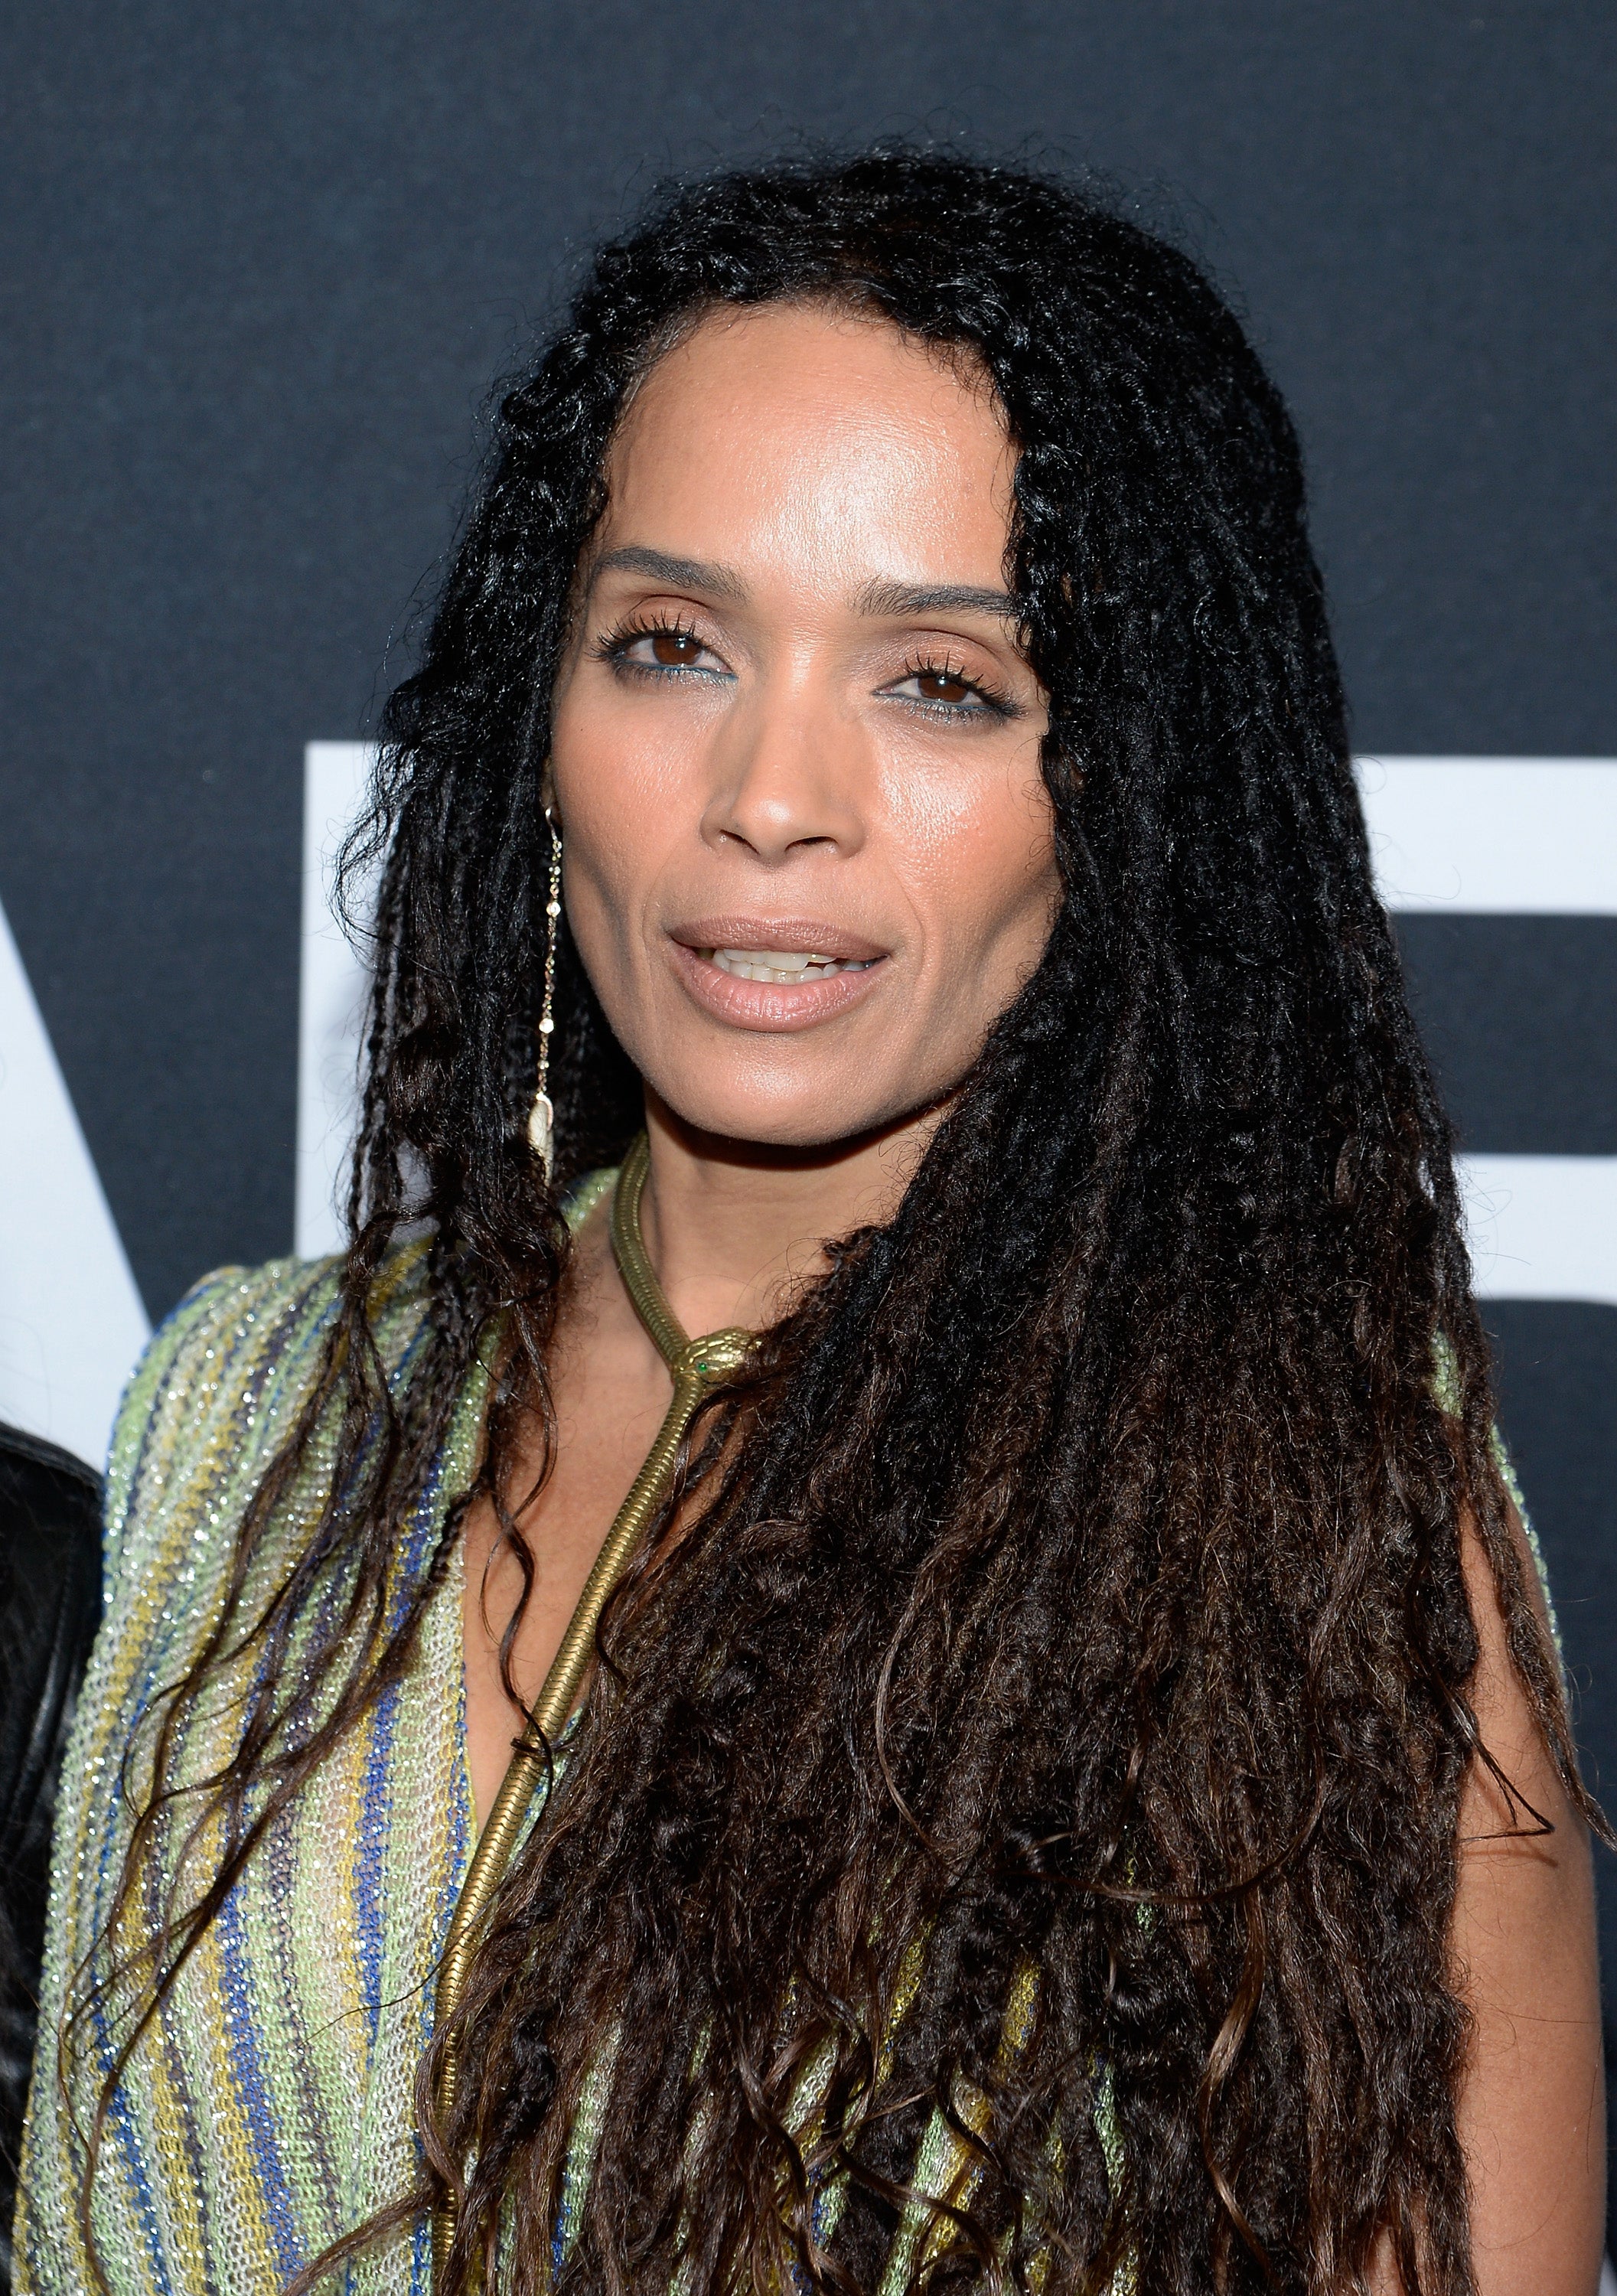 Lisa Bonet Was 'Not Surprised' By Allegations Against Bill Cosby
